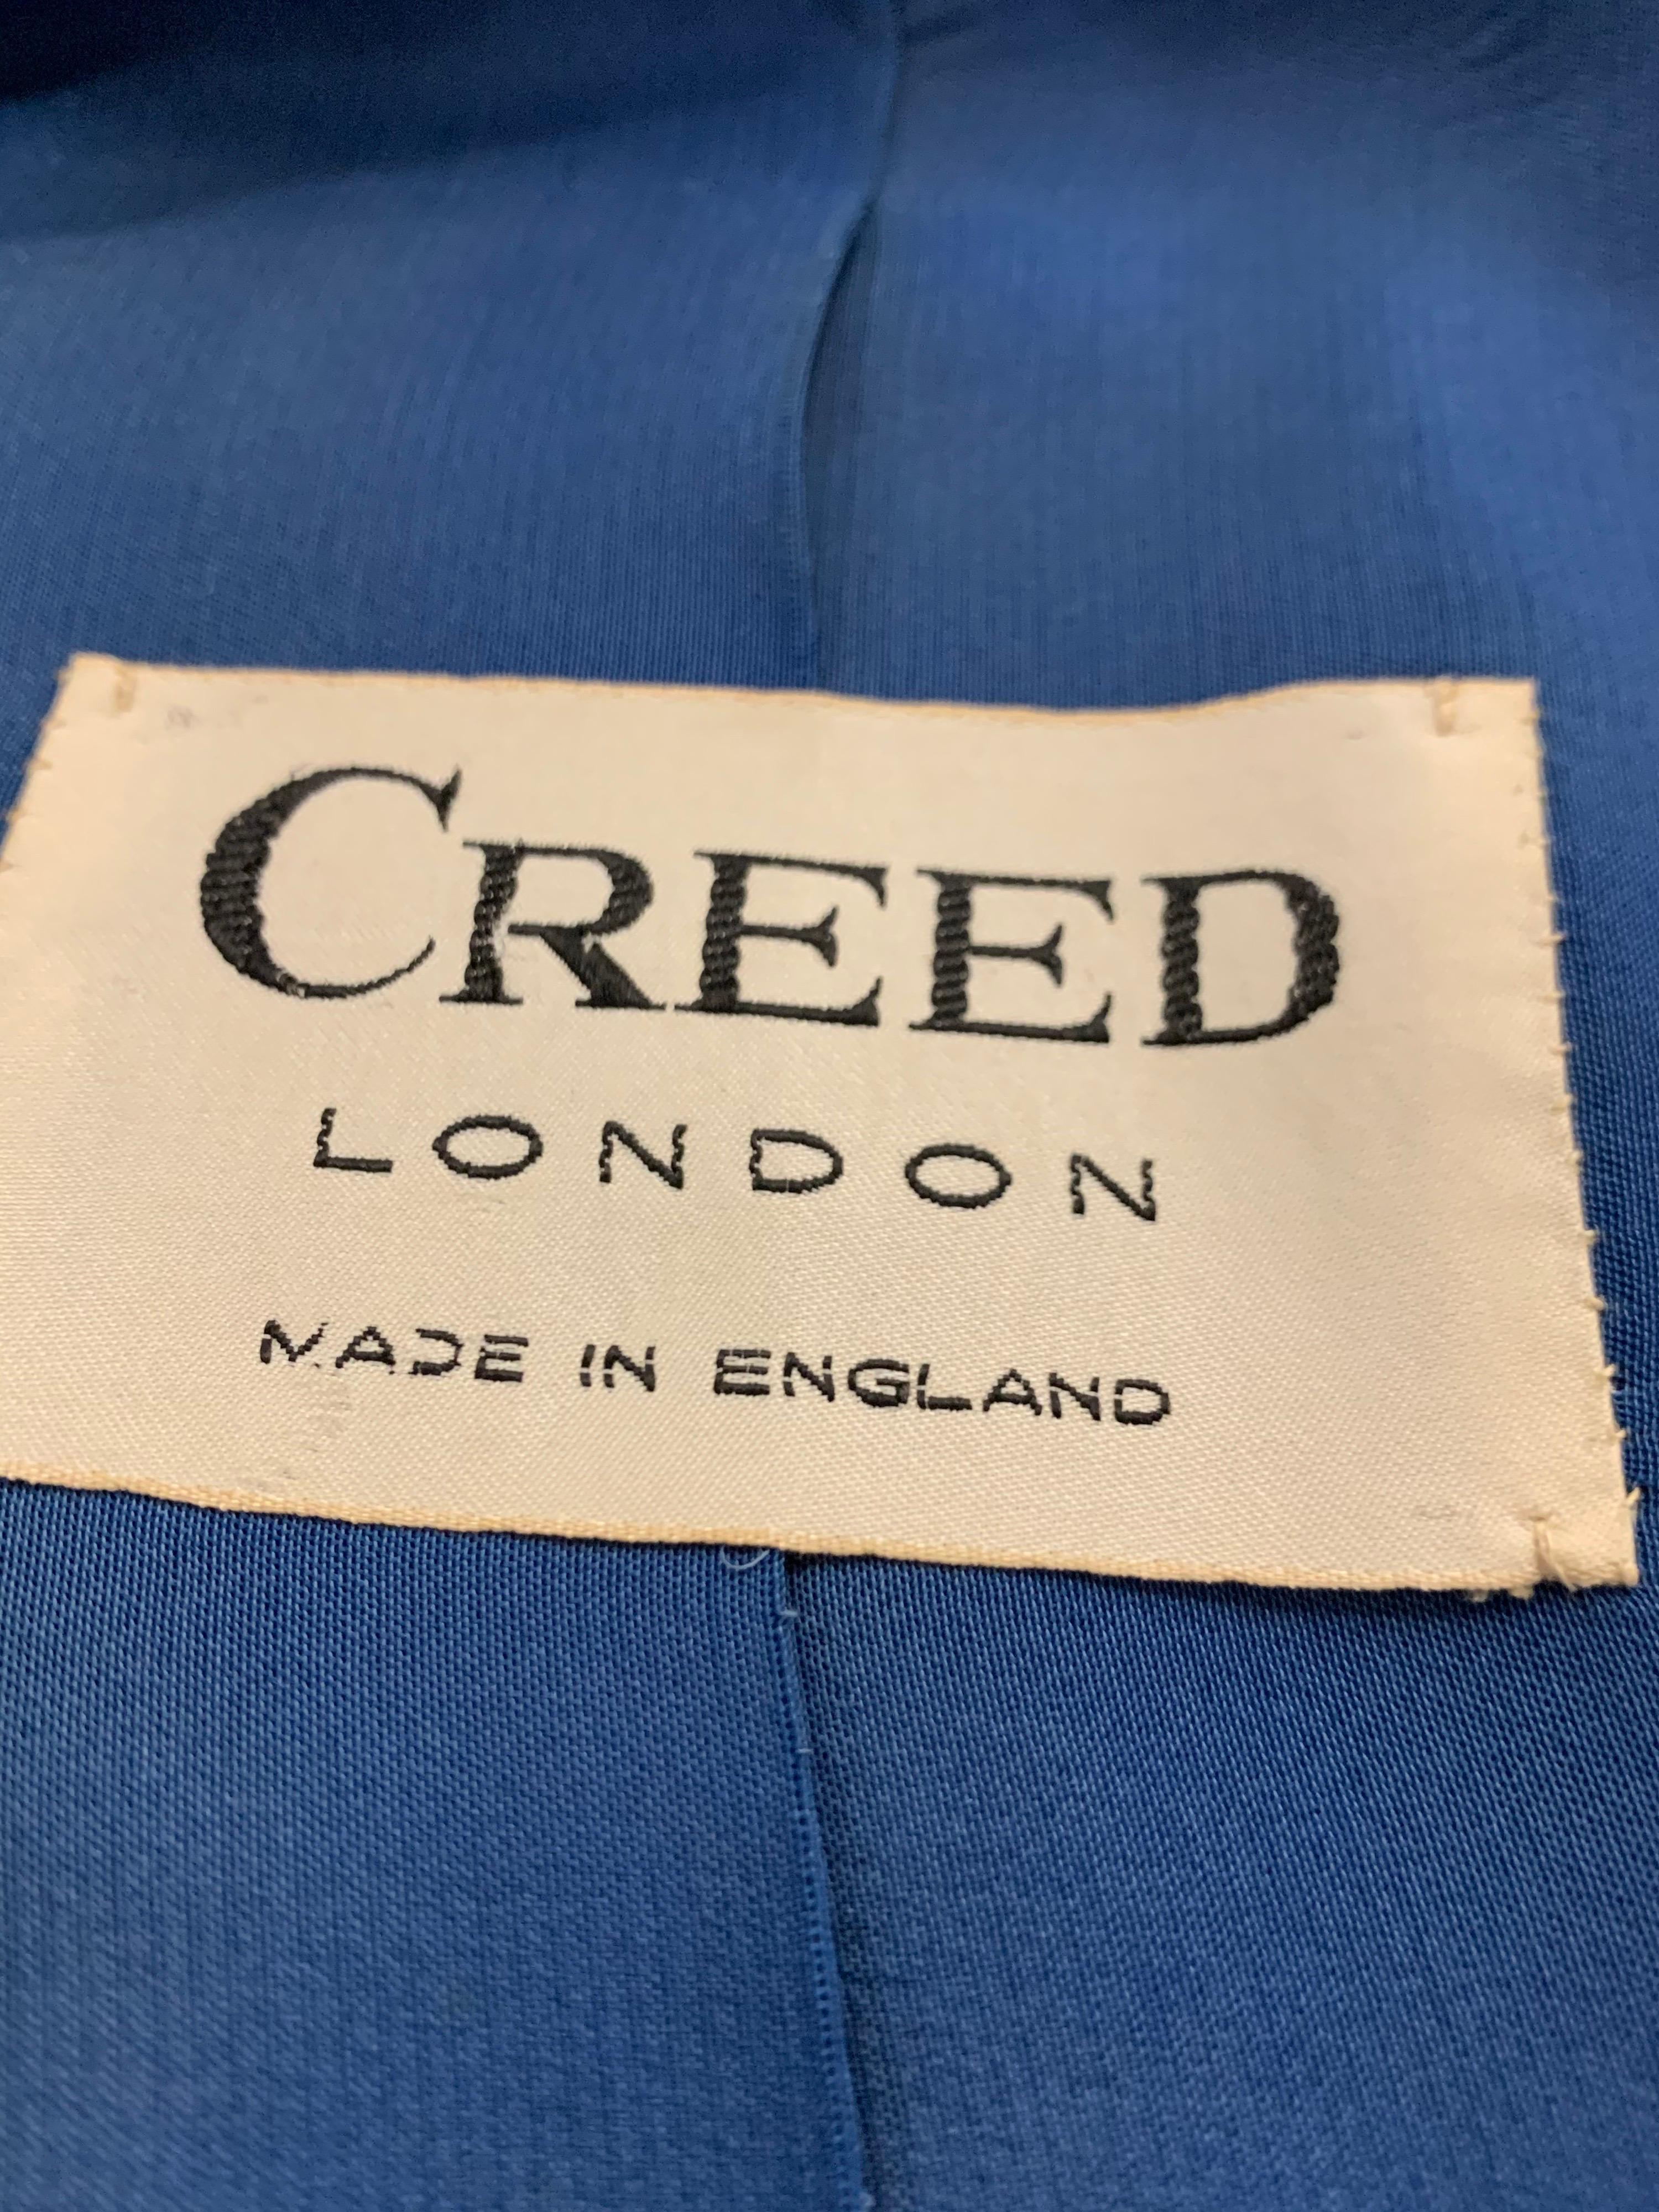 1940s Creed of London Finely Tailored Couture Royal Blue Skirt Suit w/ Caplet  For Sale 6